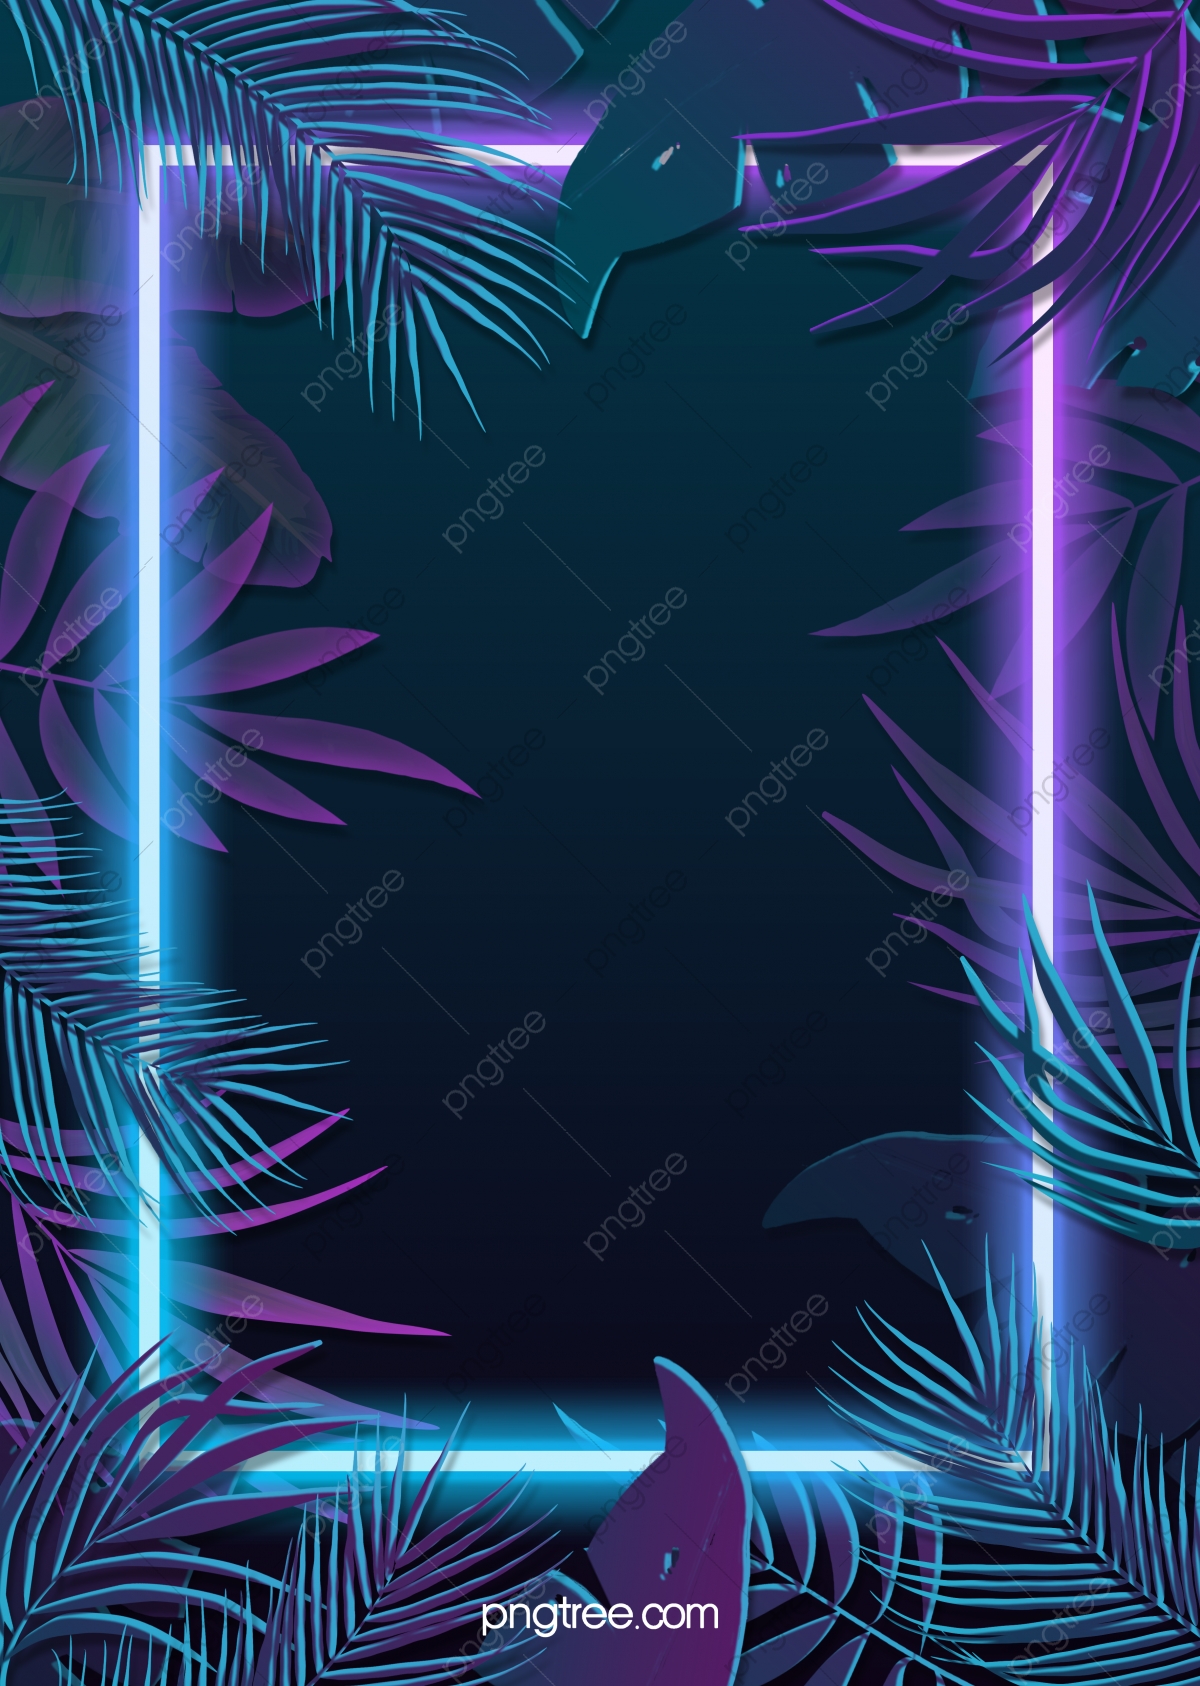 Tropical Plants Blue Purple Neon Effect Leaves Background, Tropical Plants, Leaf, The Neon Lights Background Image for Free Download